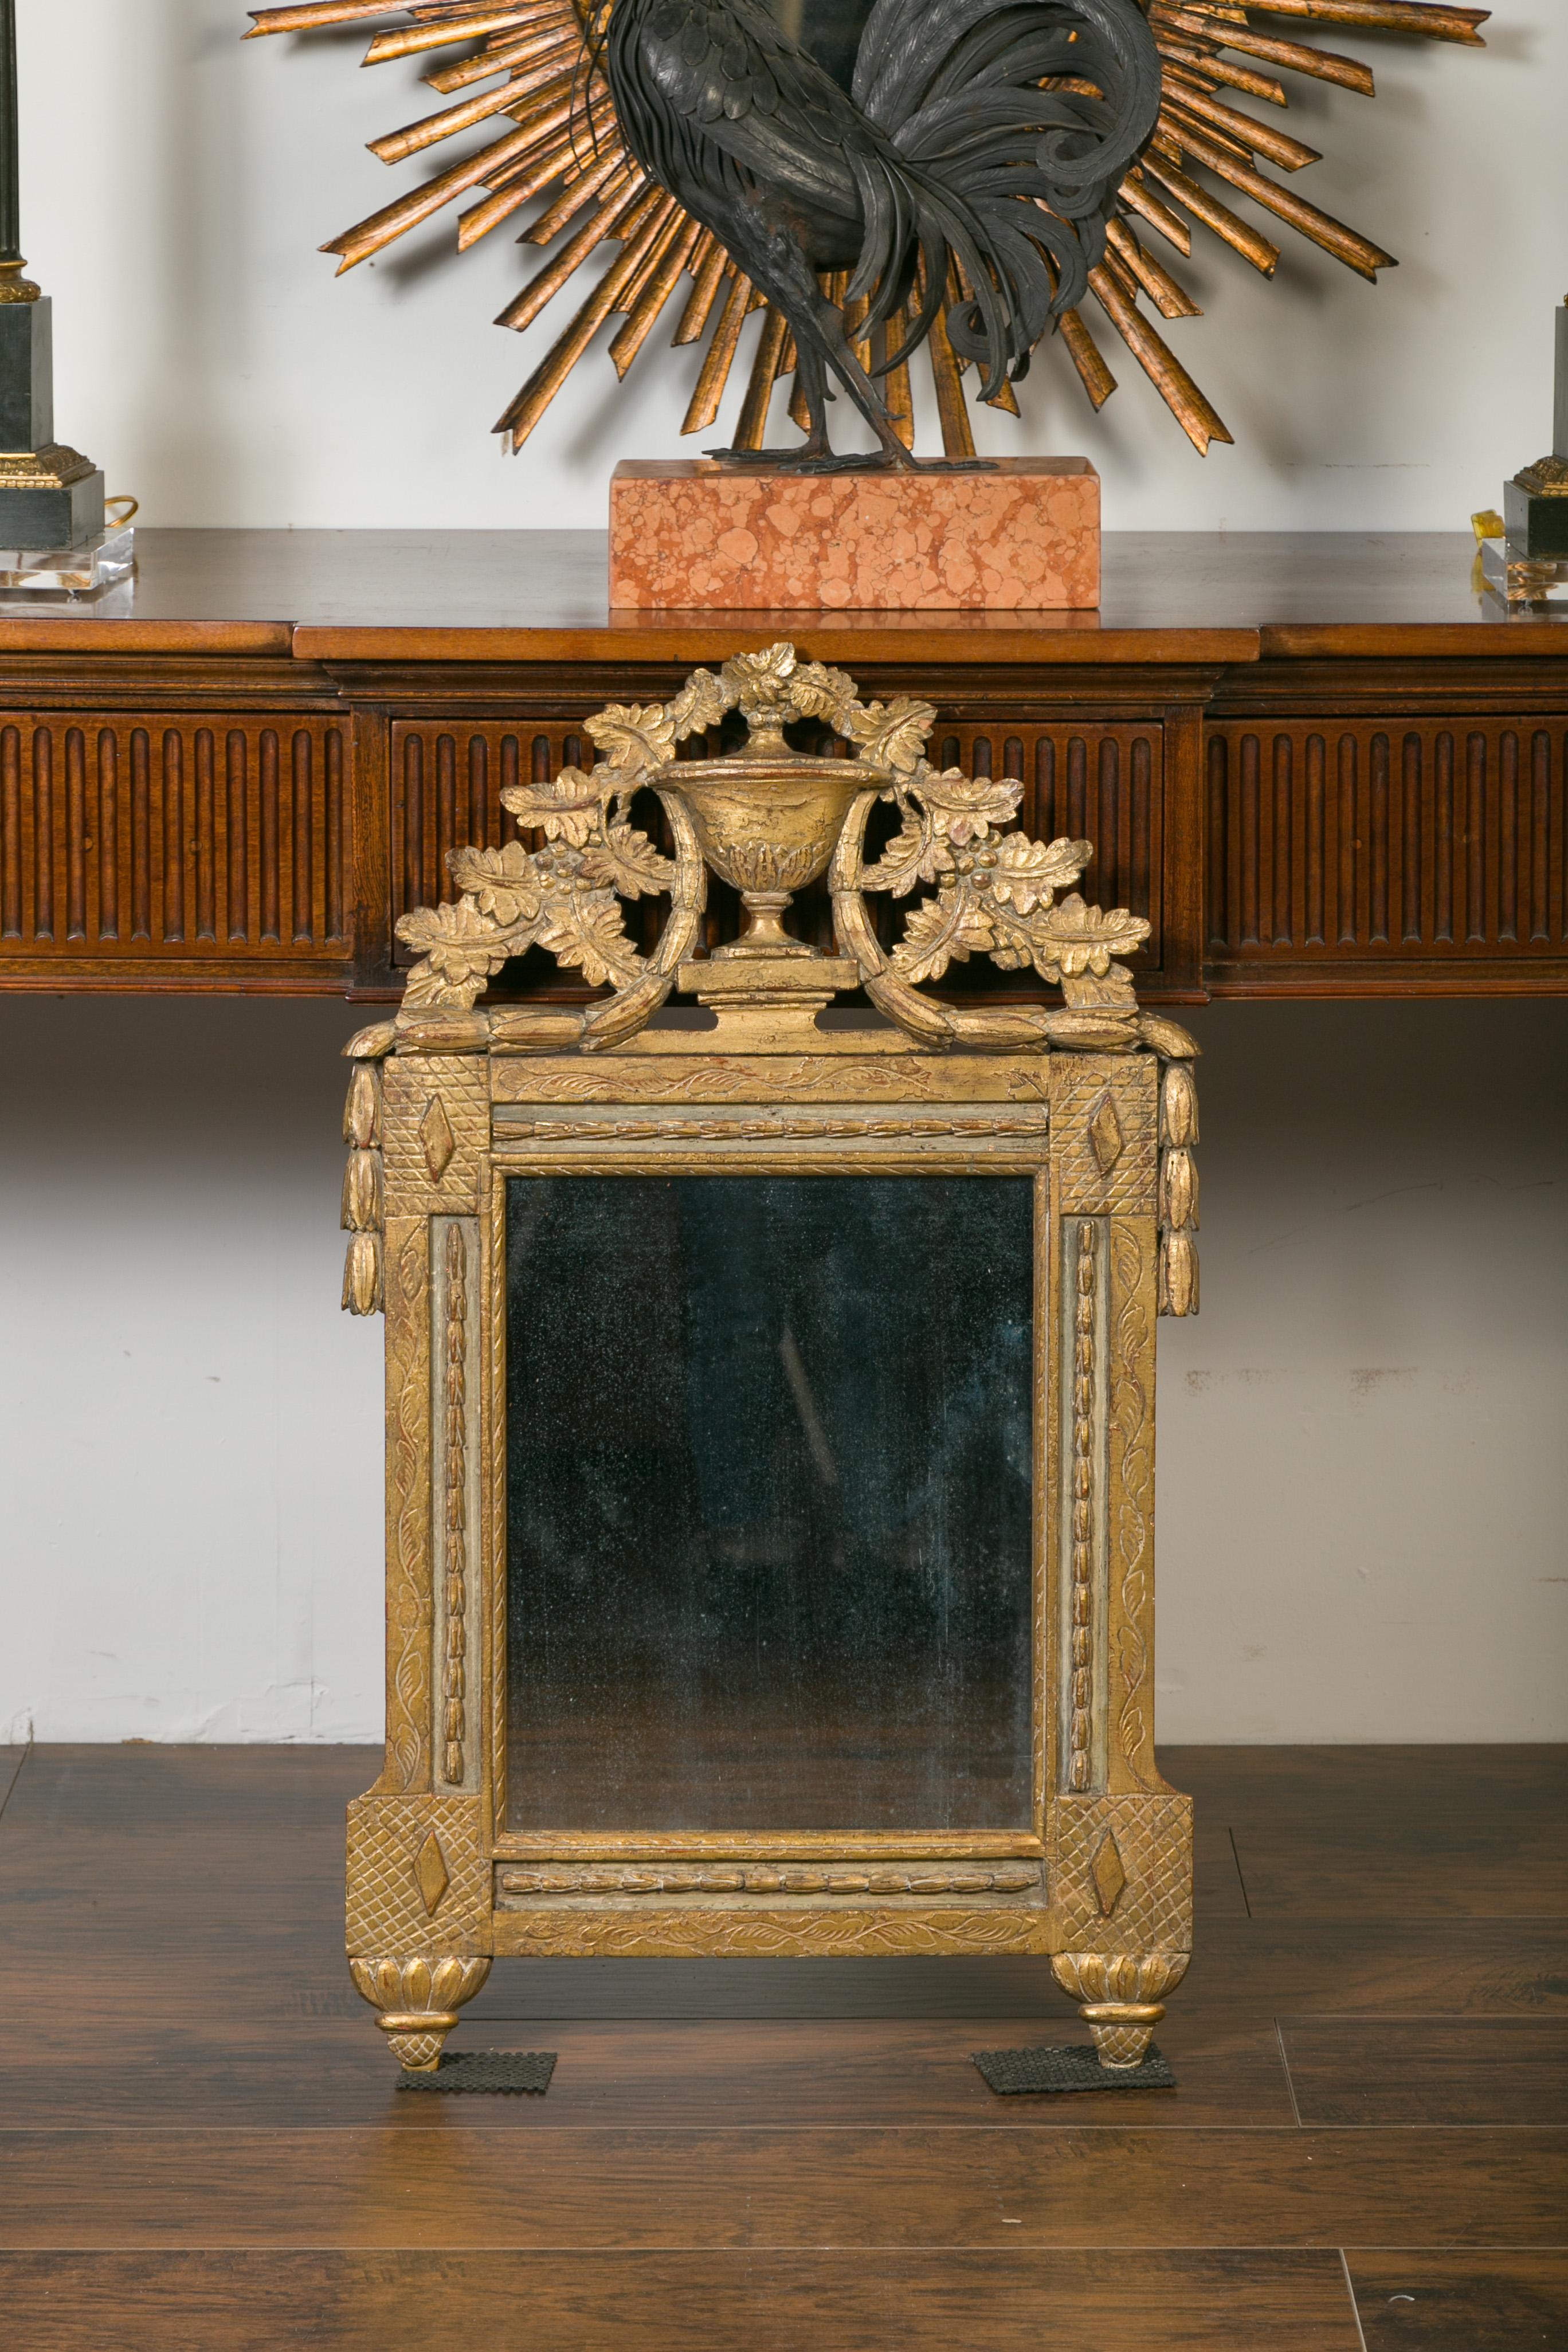 A French giltwood mirror from the early 19th century, with carved crest depicting urn, foliage and garlands. Created in France during the first decade of the 19th century, this giltwood mirror attracts immediately our attention with its carved crest